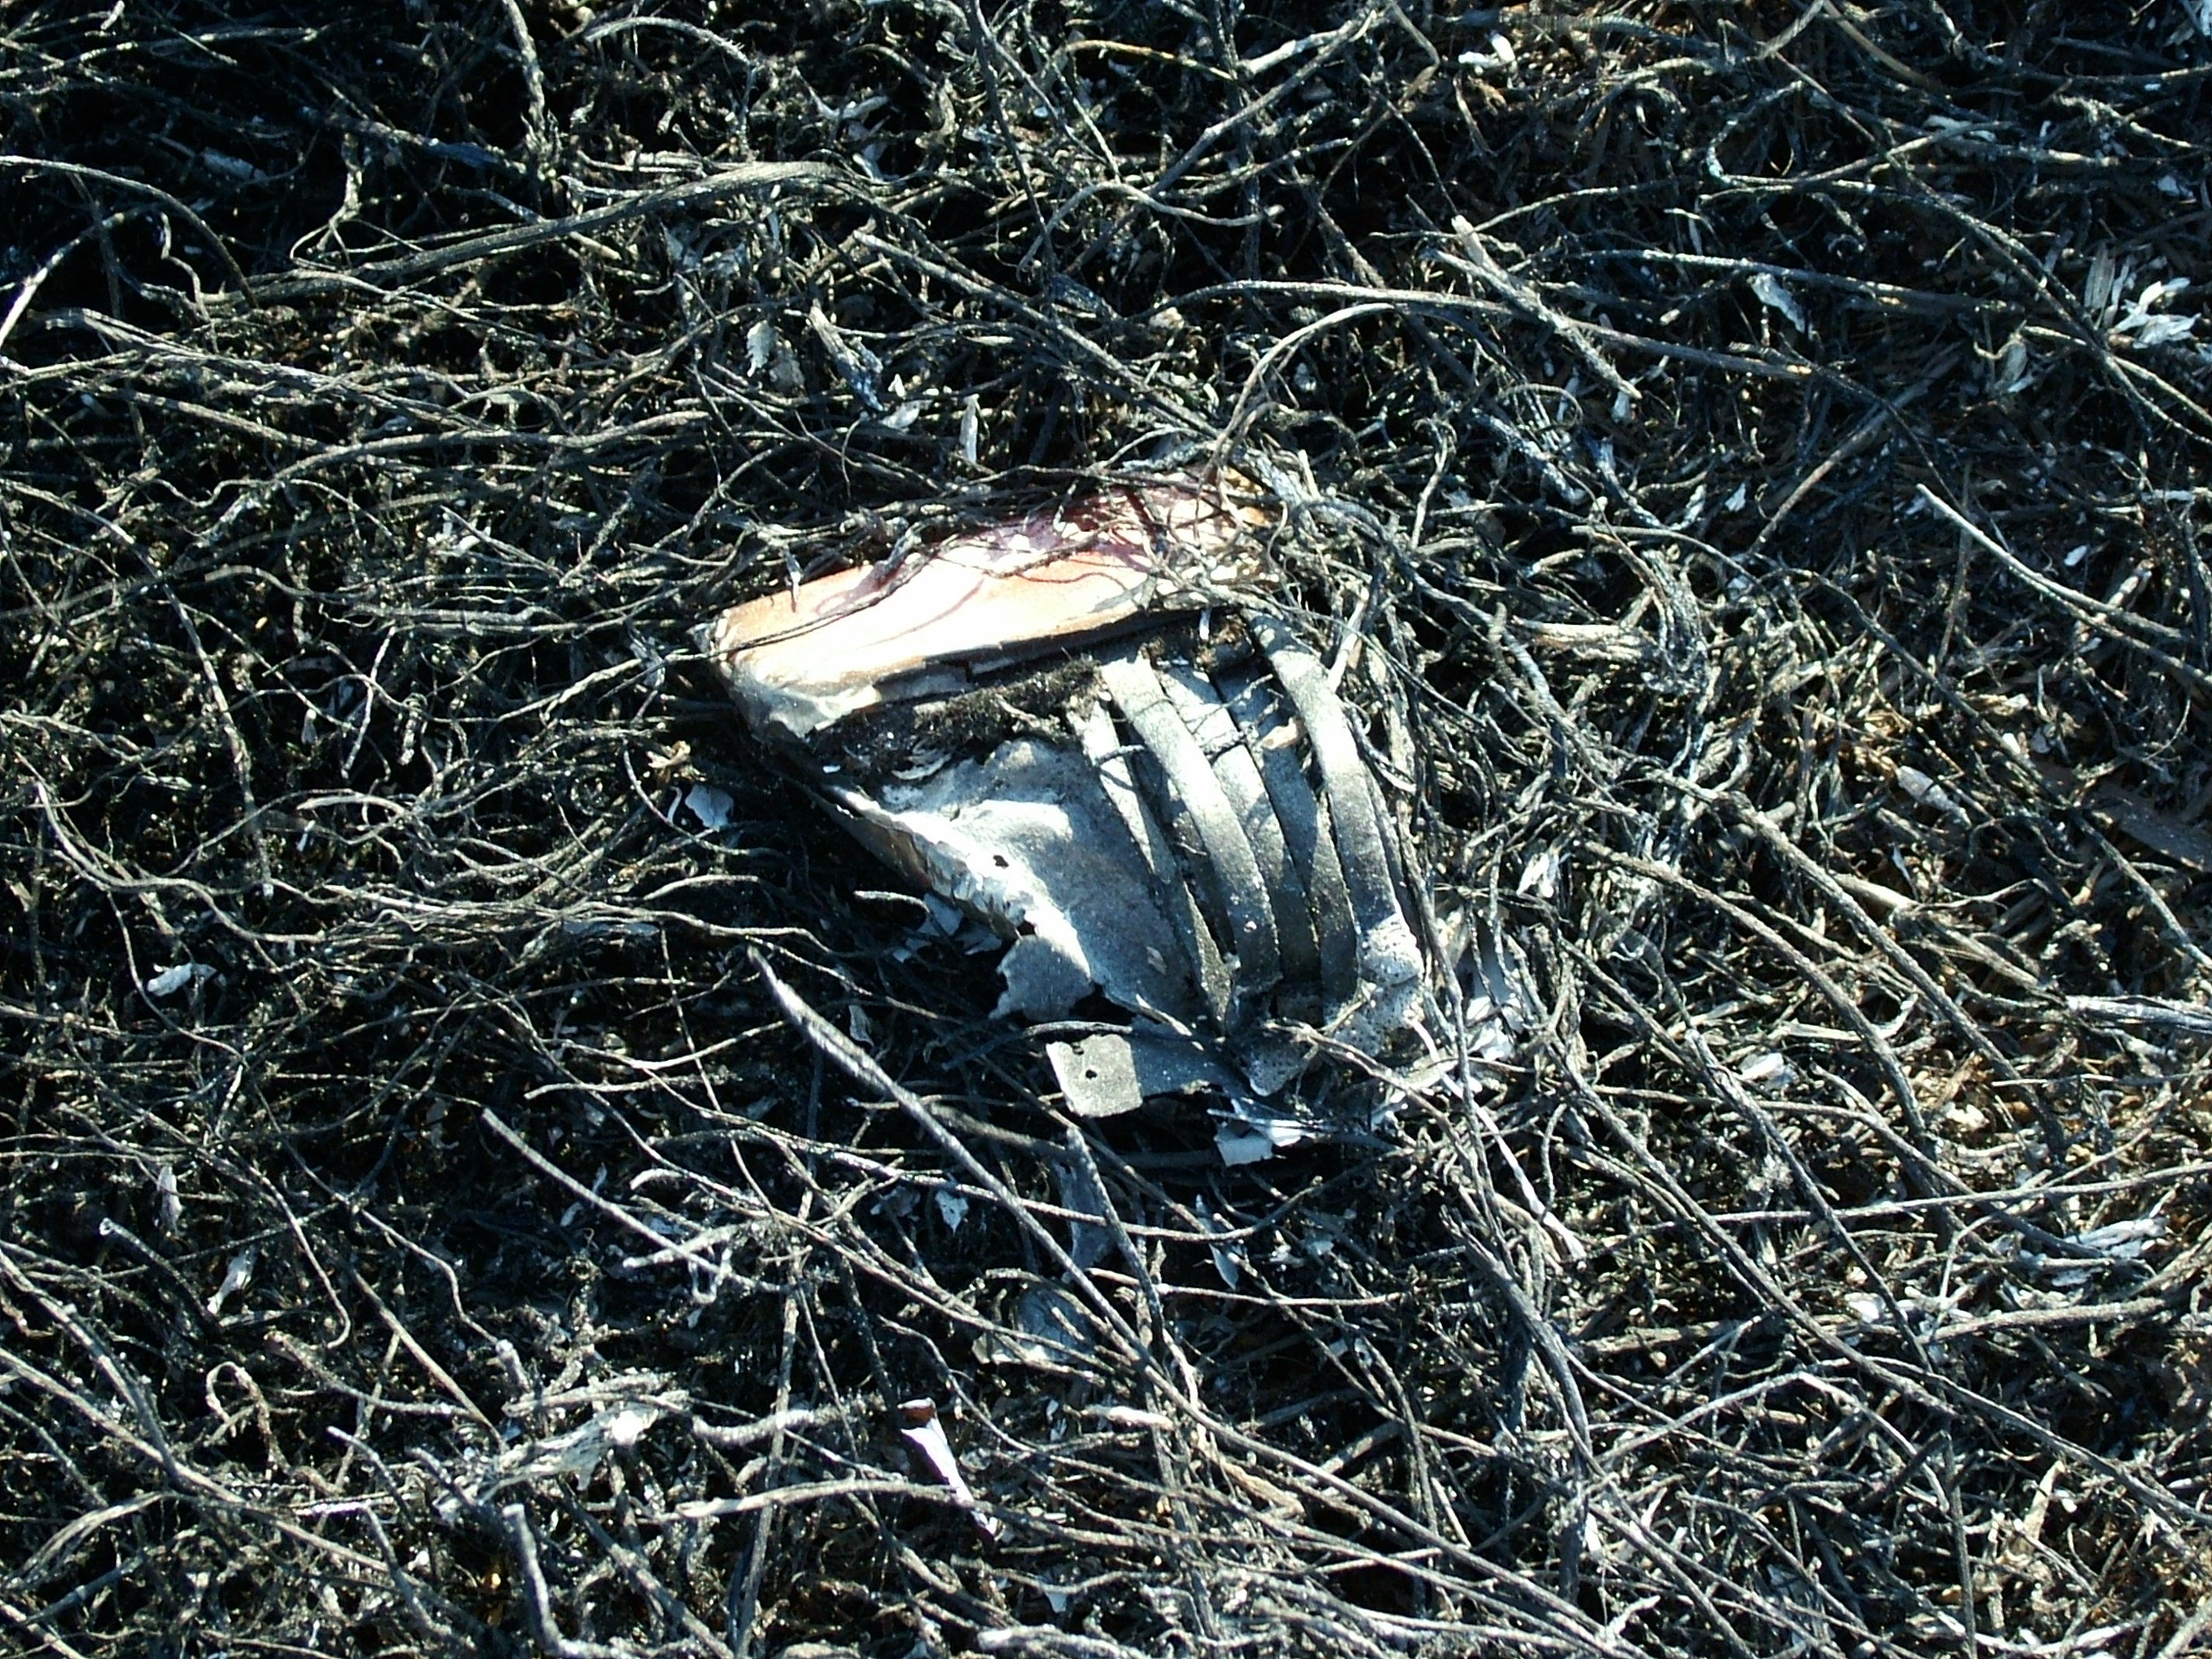 Matches burnt at the site of a wildfire ignition.